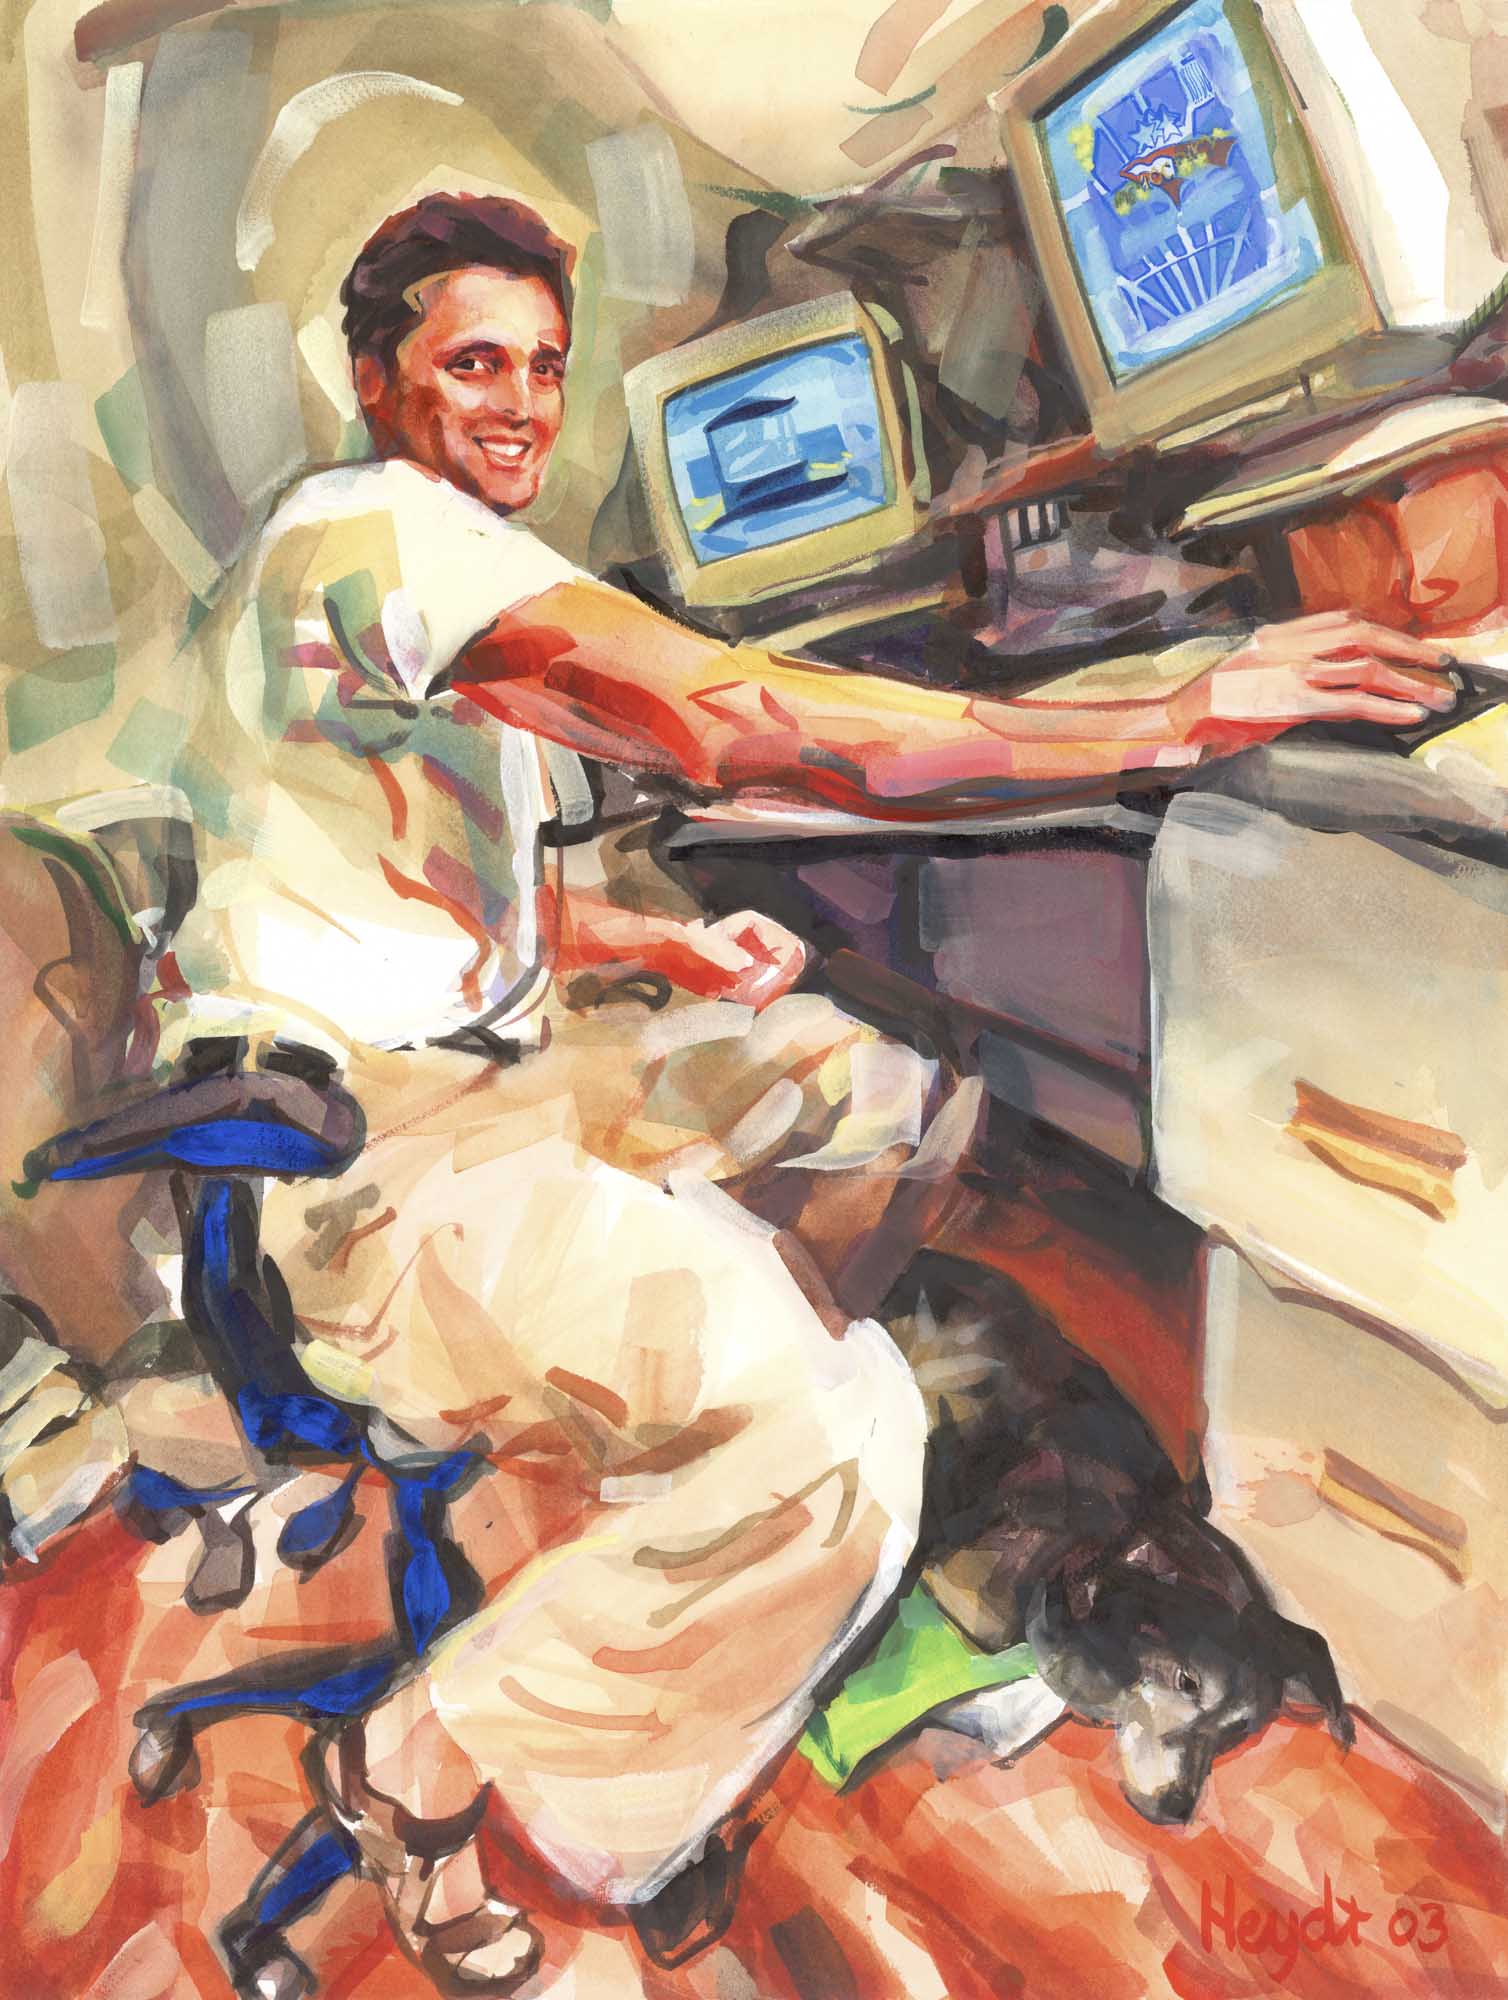 man with computers.jpg